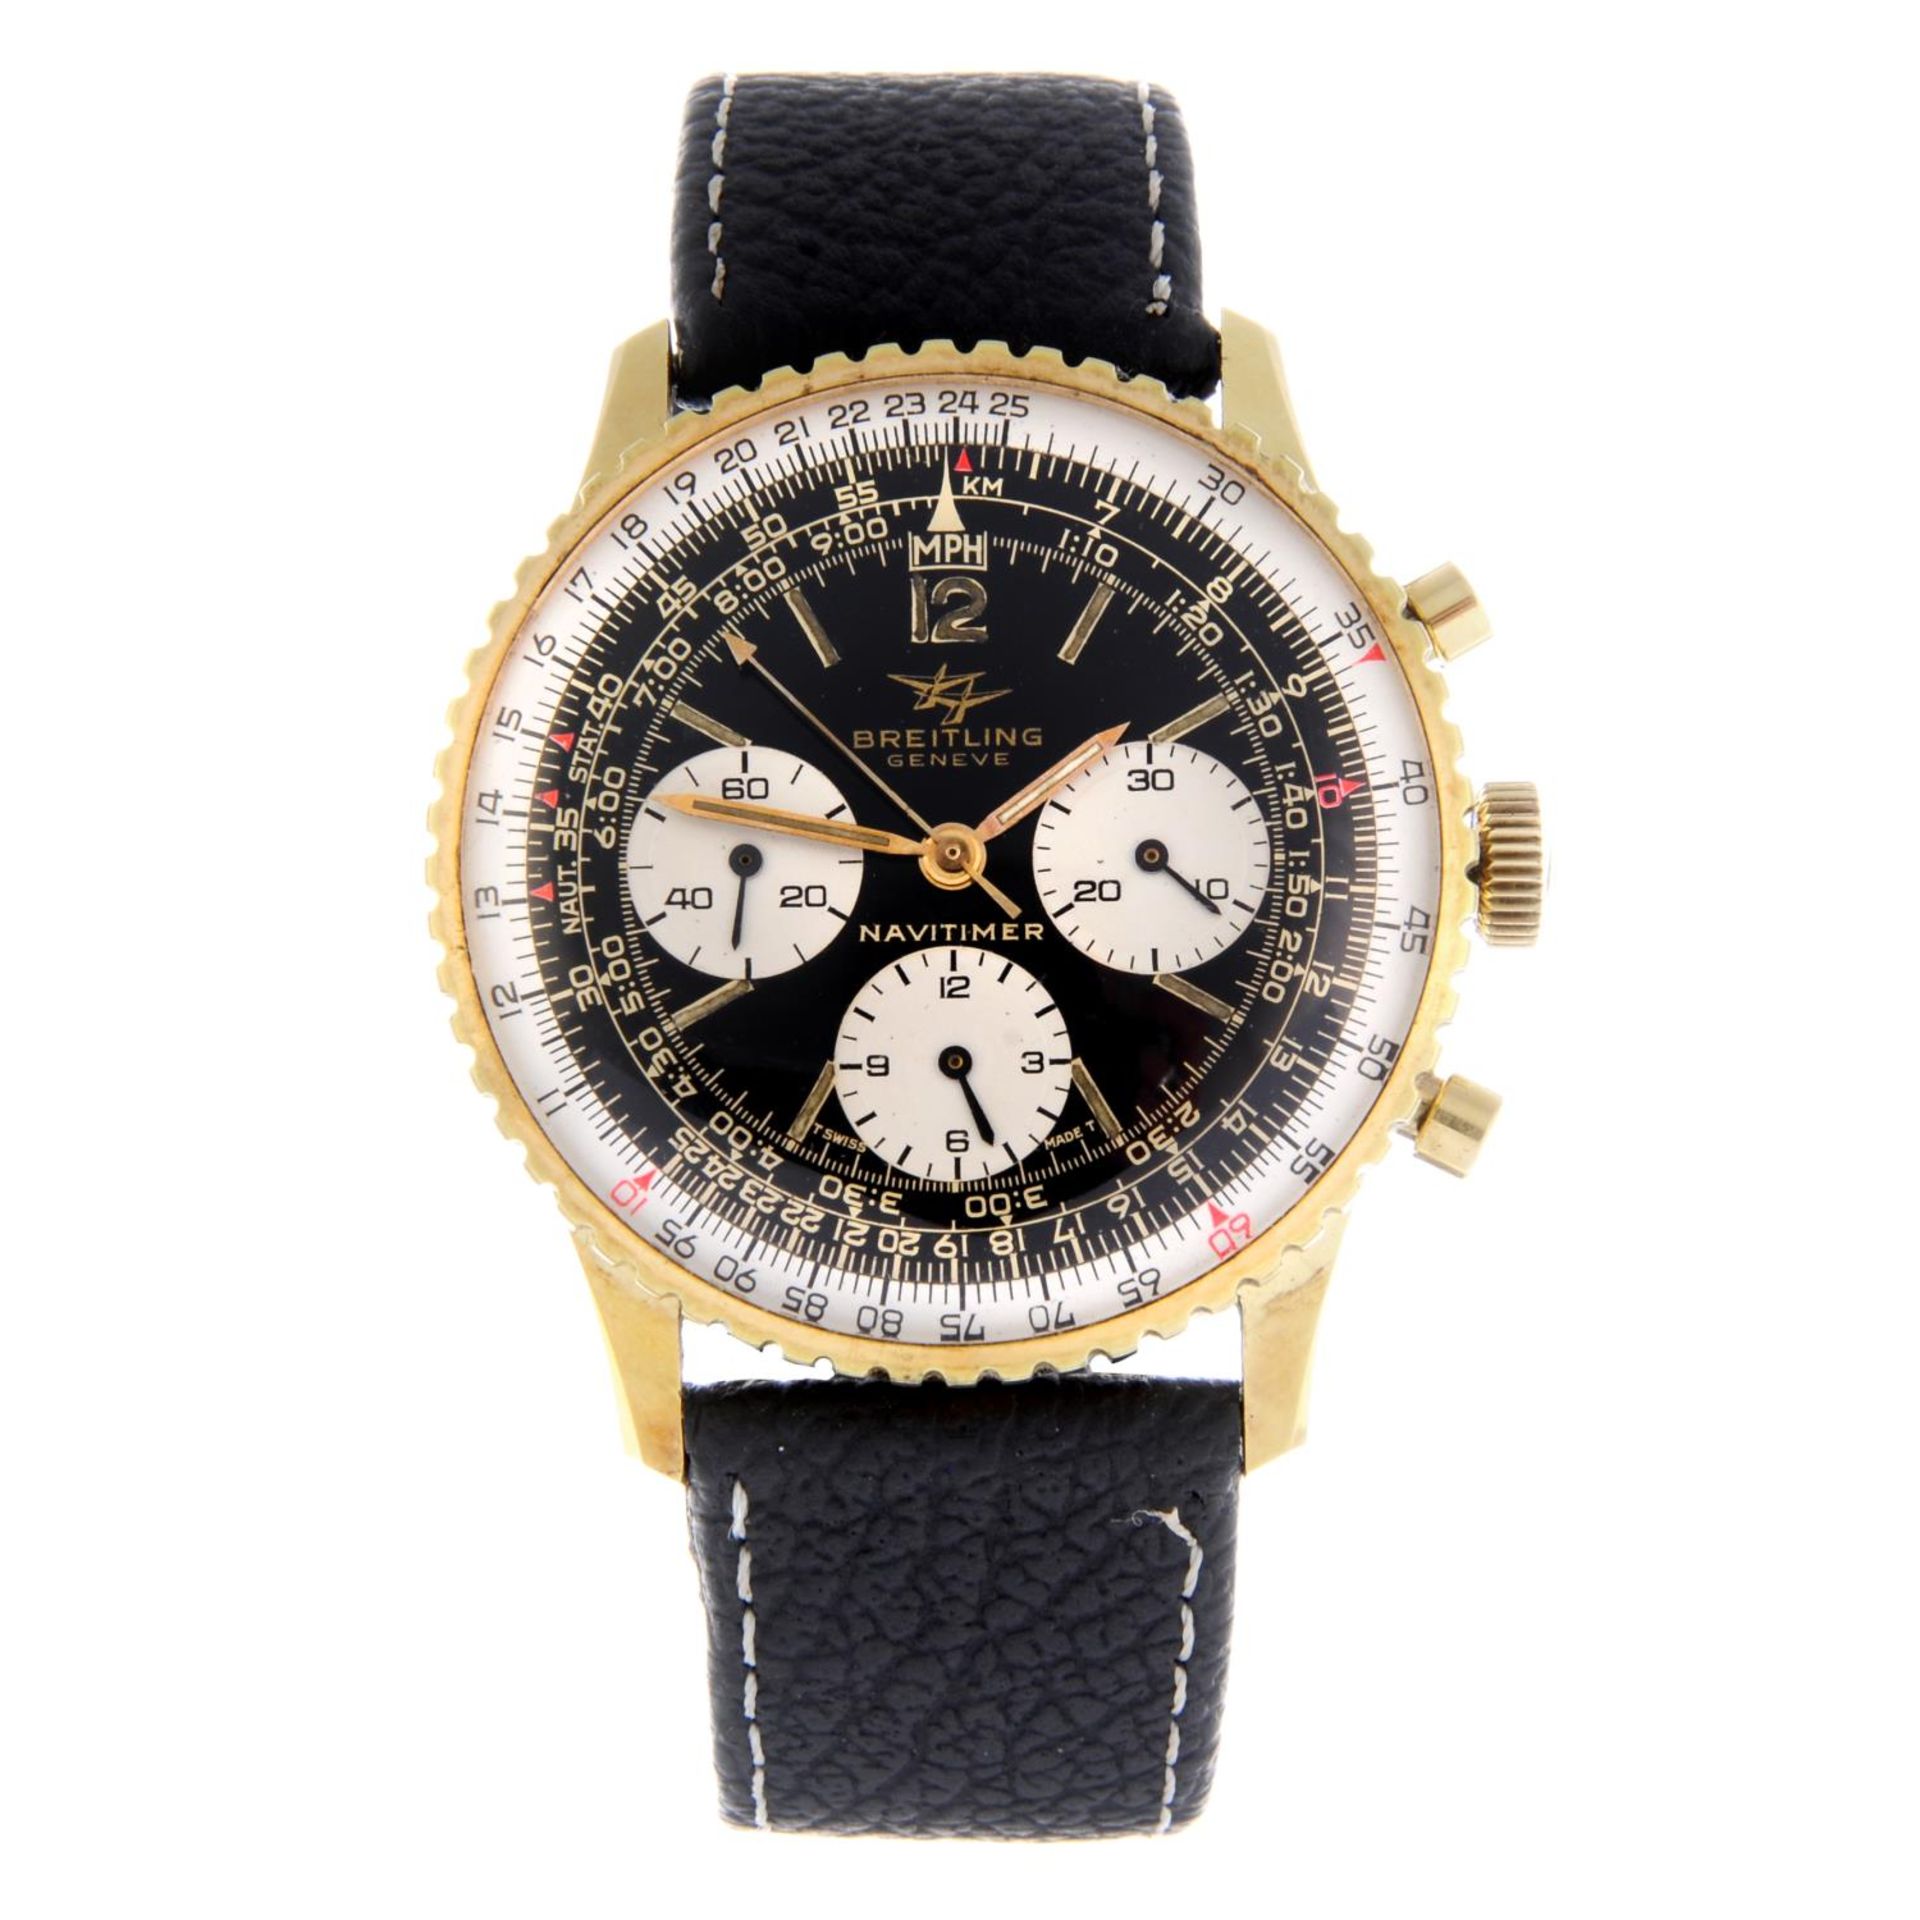 BREITLING - a gentleman's Navitimer chronograph wrist watch. Gold plated case with inner slide